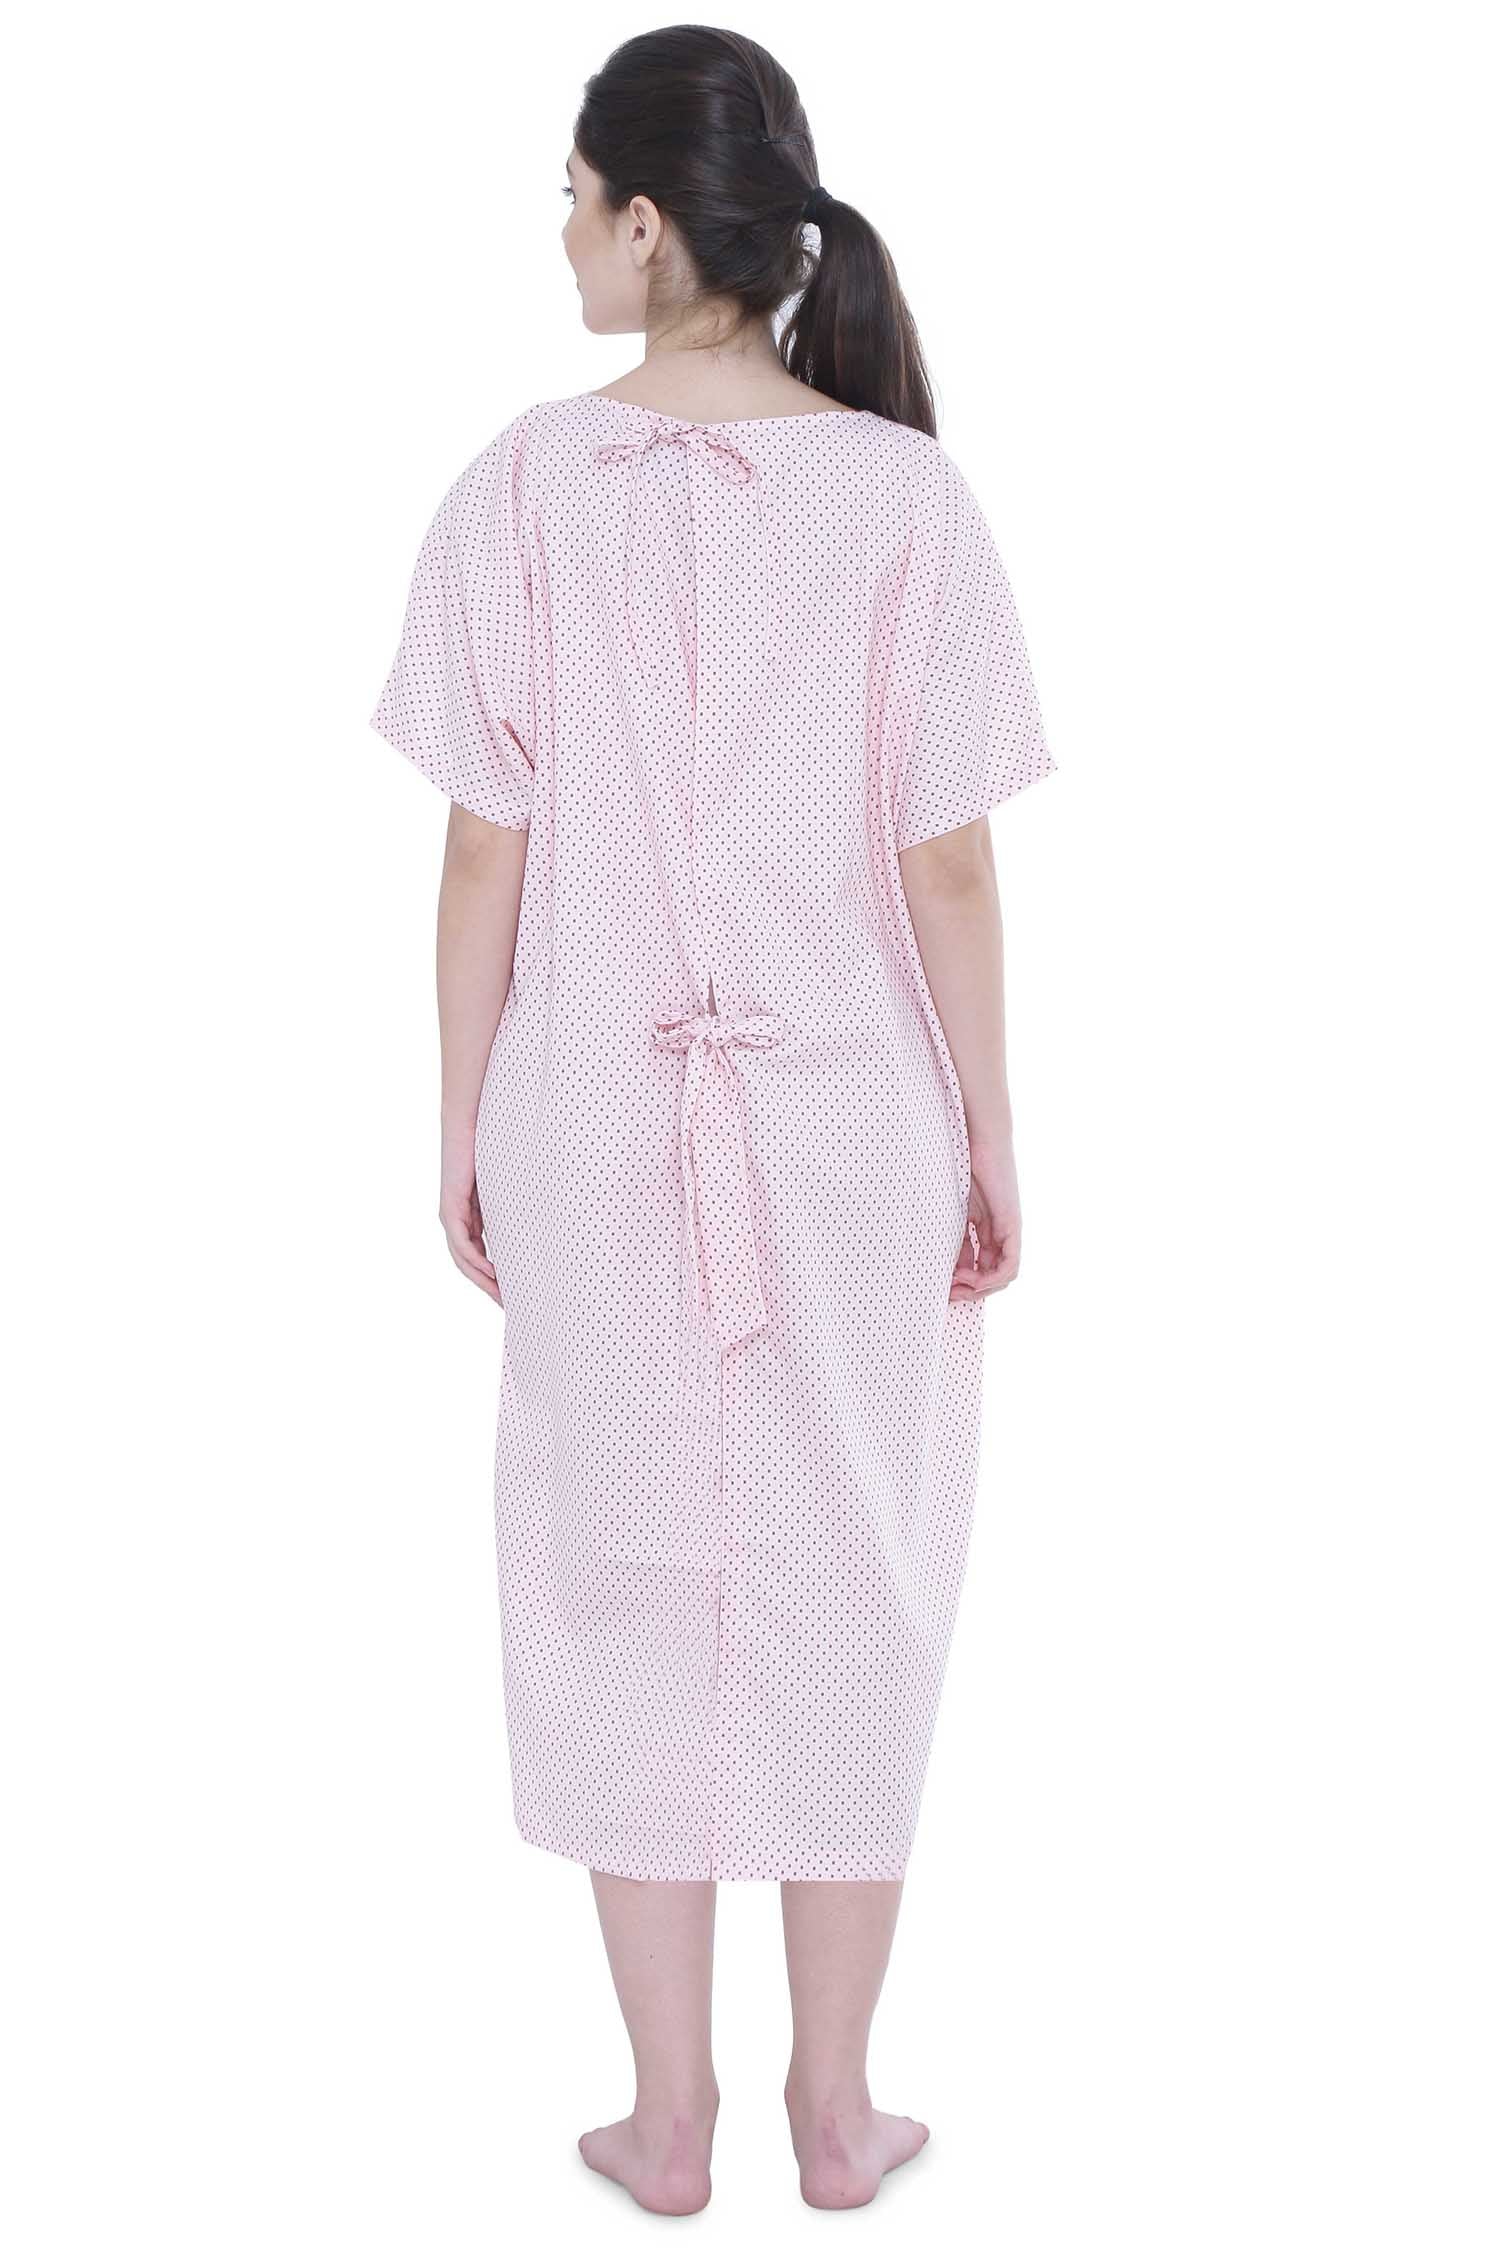 Stitched Printed Patient Gown, Machine wash, Size: One Size Fit Most at Rs  450 in New Delhi